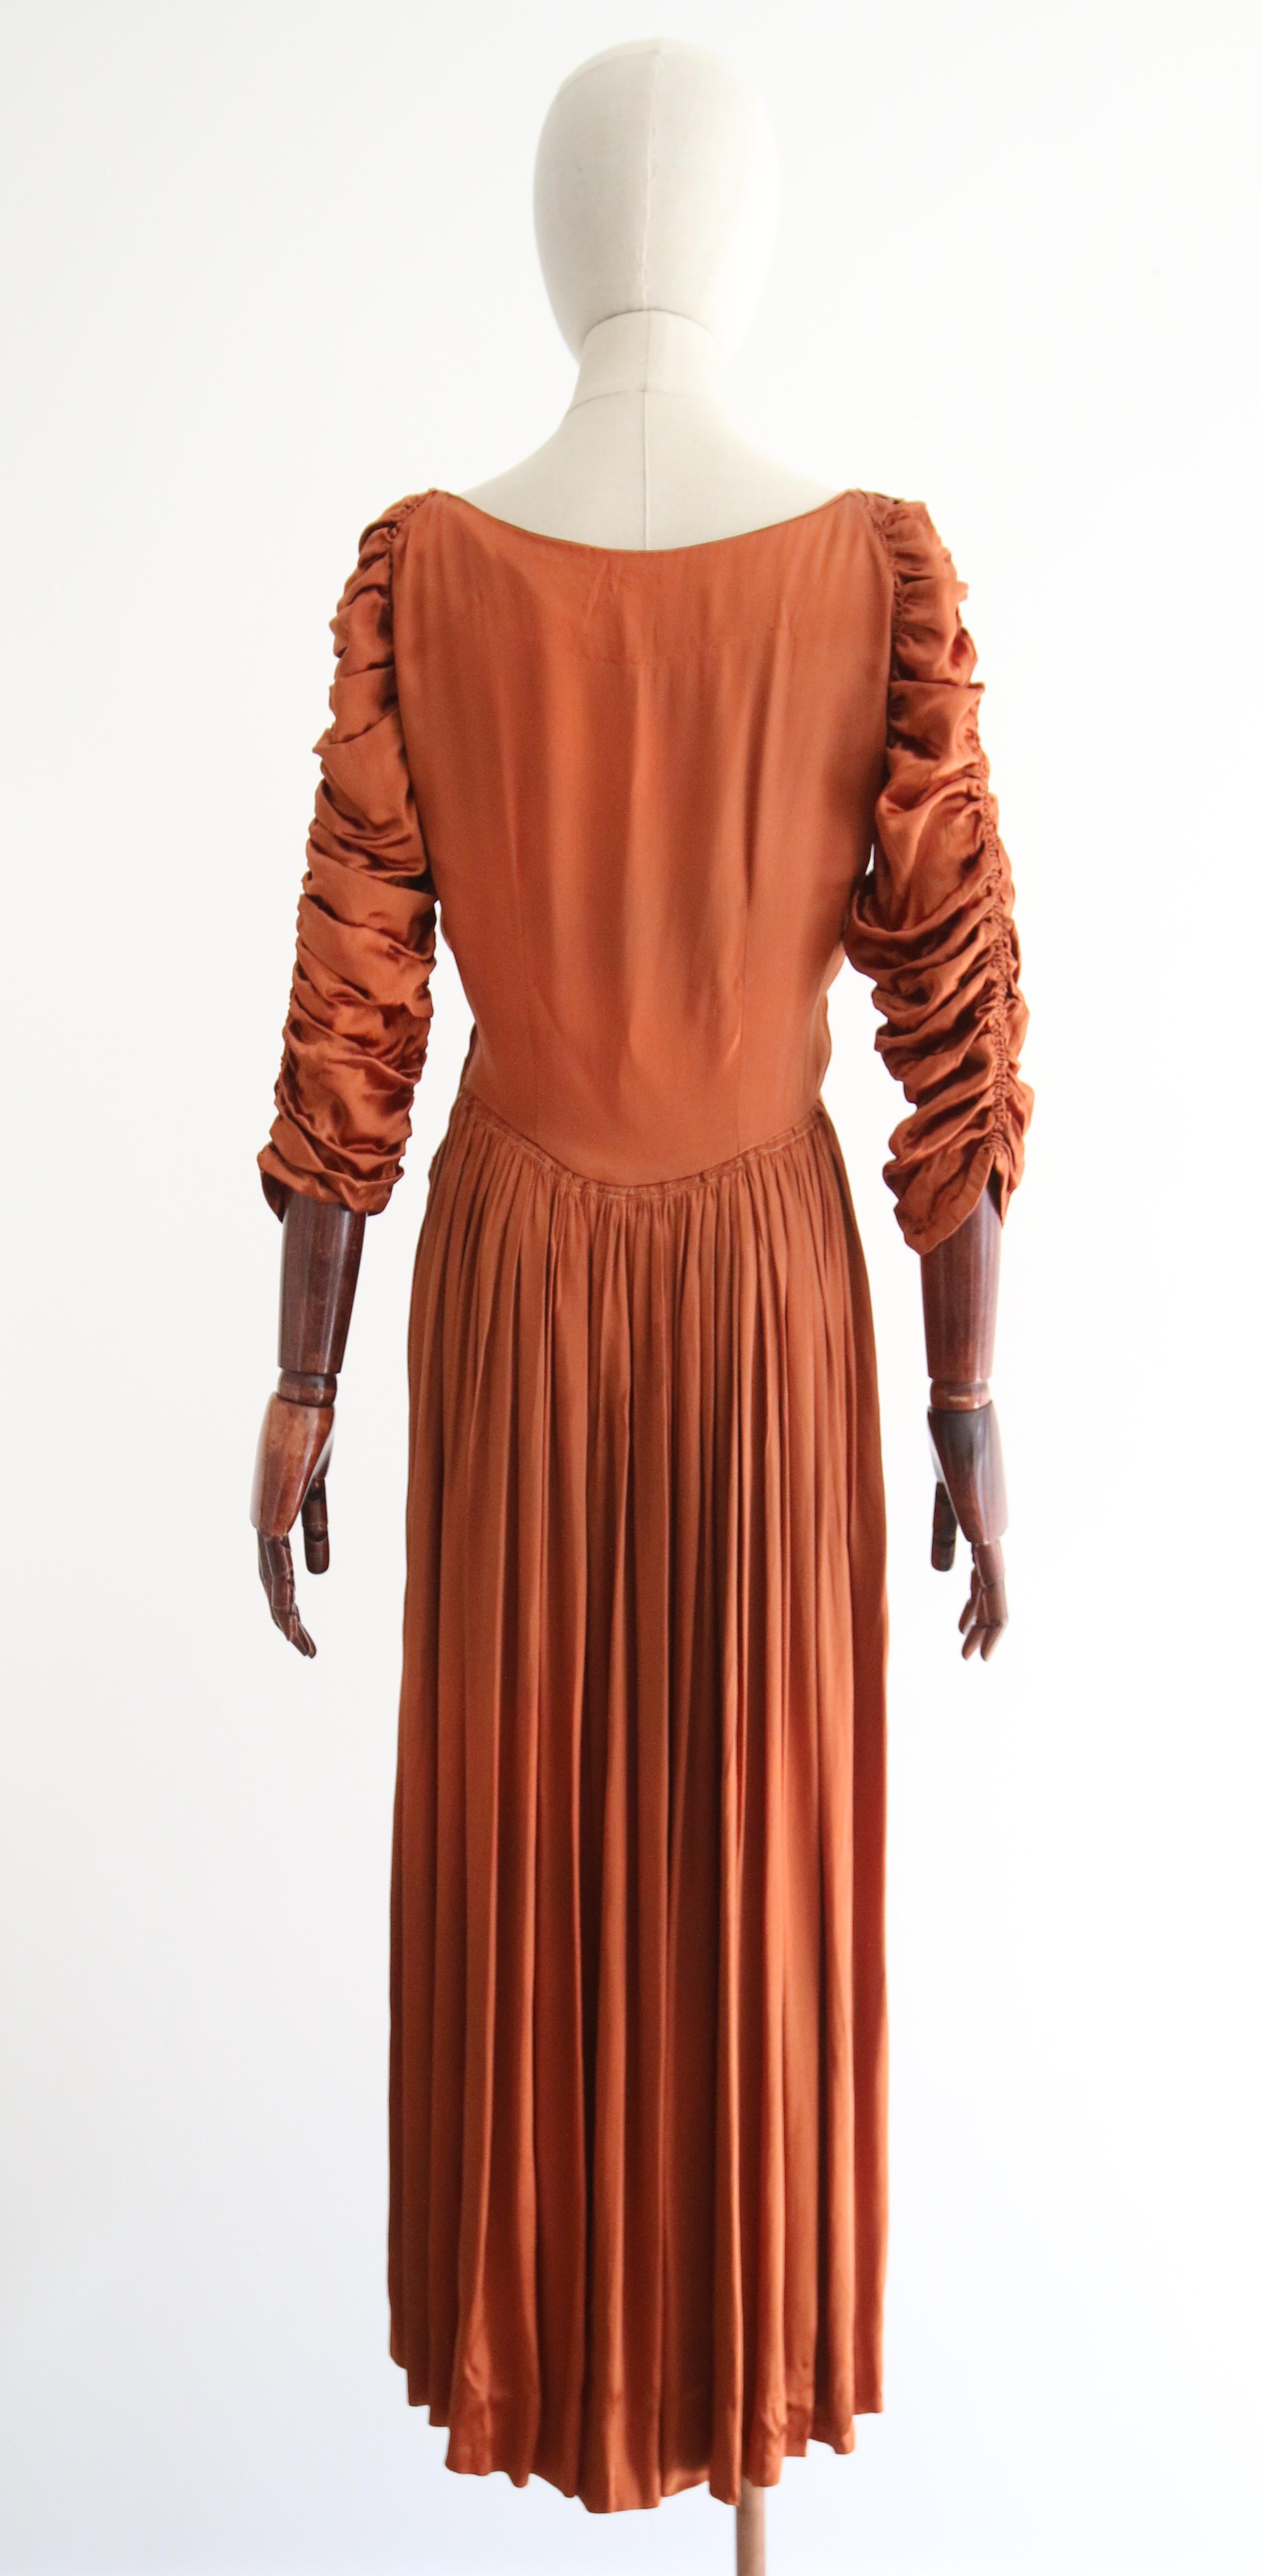 Vintage 1930's Pleated & Ruched Amber Satin Dress UK 10 US 6 For Sale 4